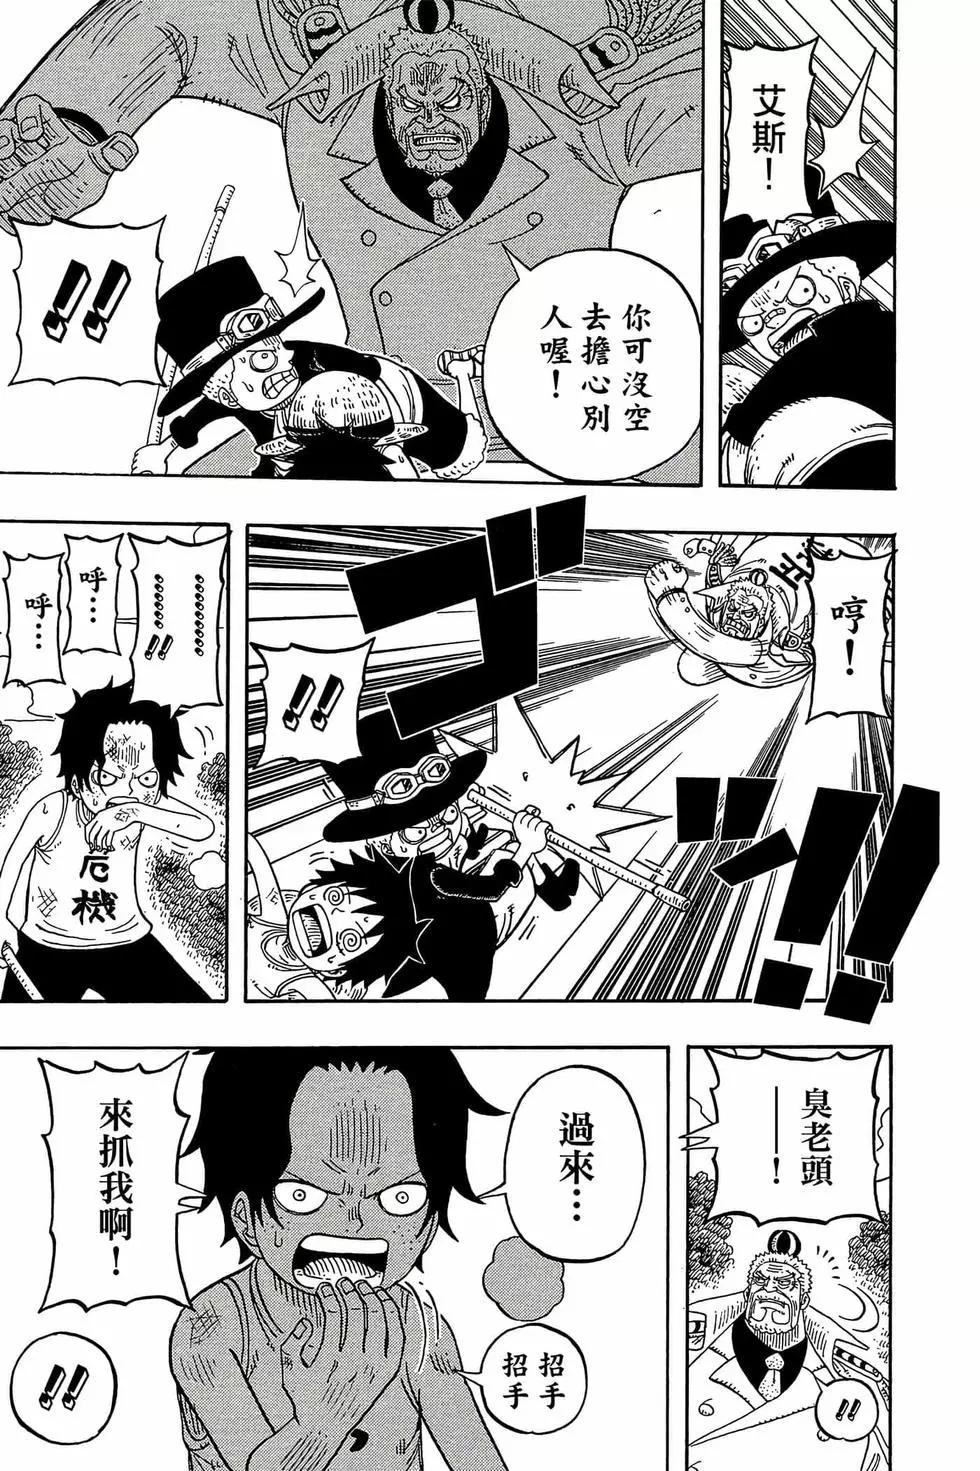 One piece party - 第03卷(2/4) - 6